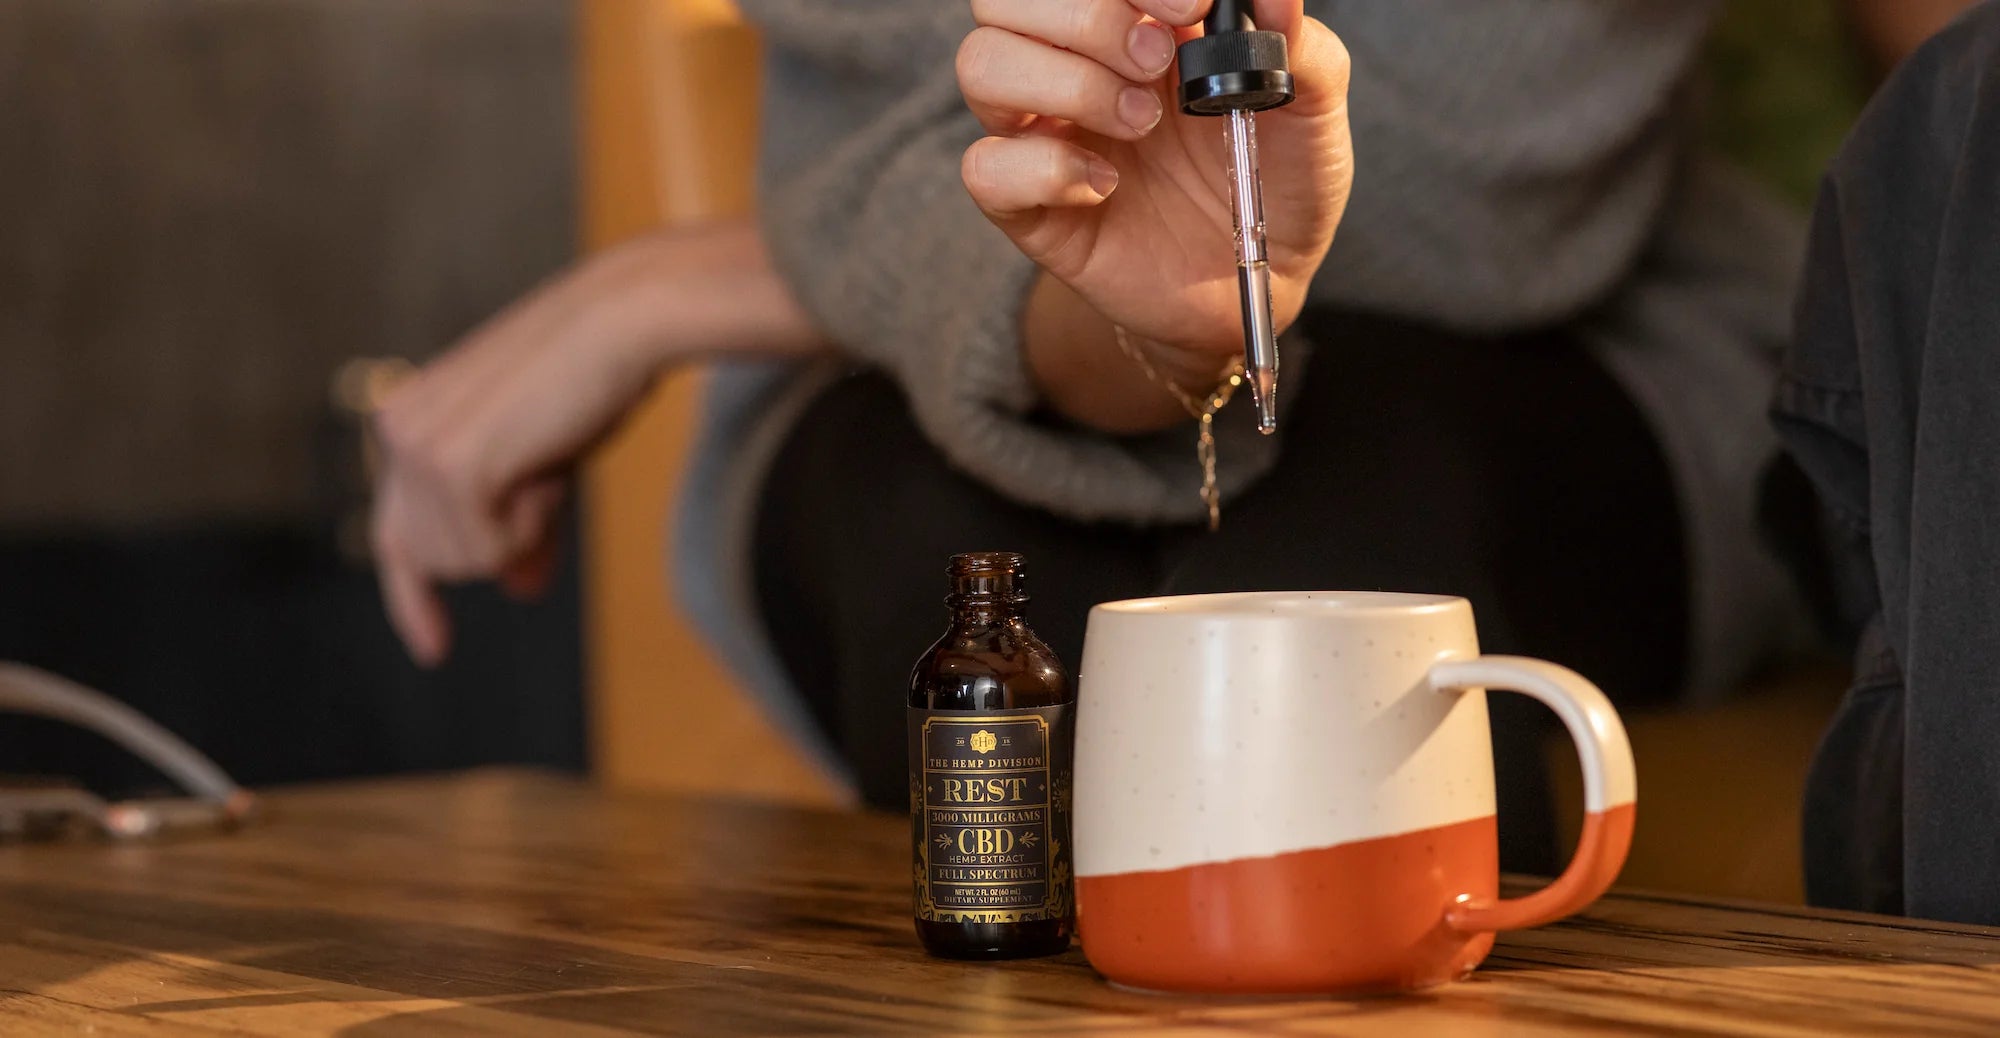 Hand holding a dropper over a mug, with a bottle labeled “REST 3000 Milligrams CBD Hemp Extract Full Spectrum.”